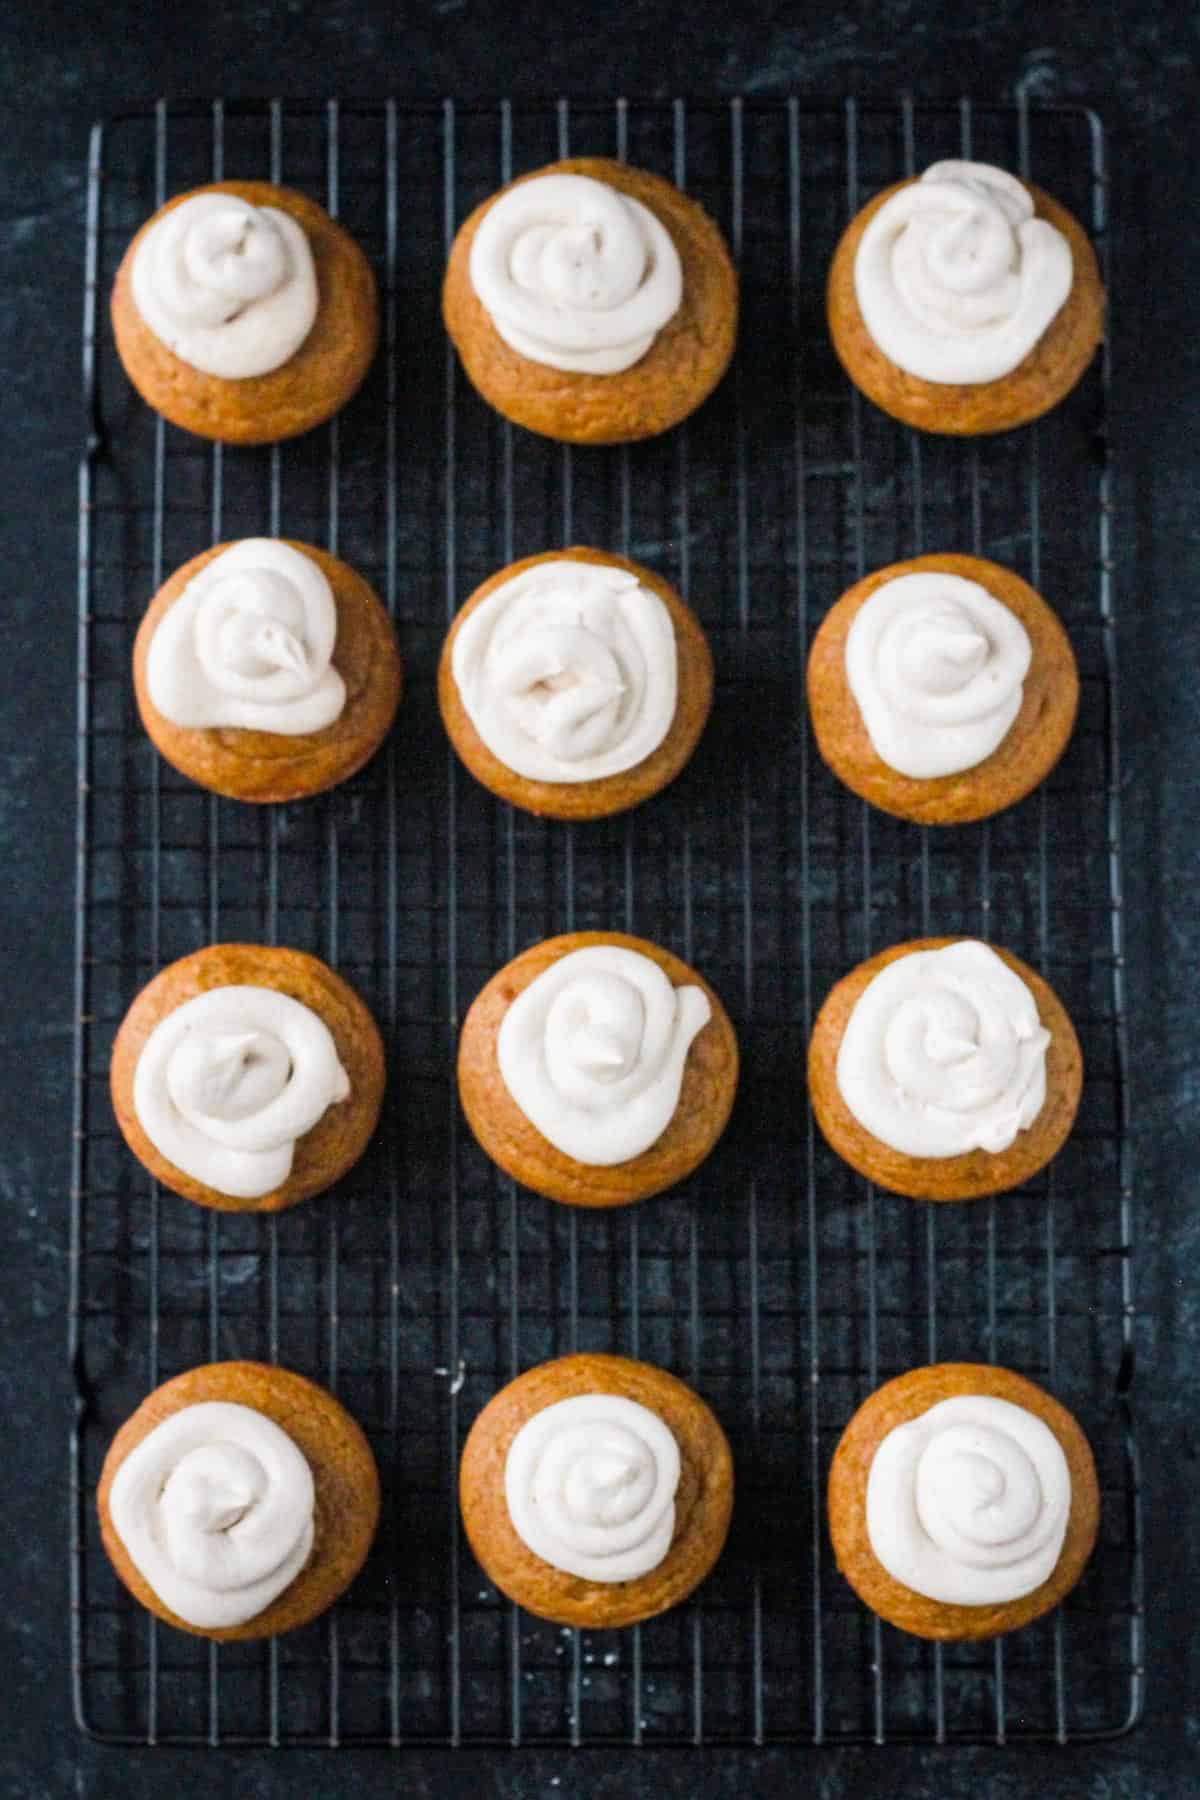 Twelve frosted vegan pumpkin cupcakes on a wire cooling rack.